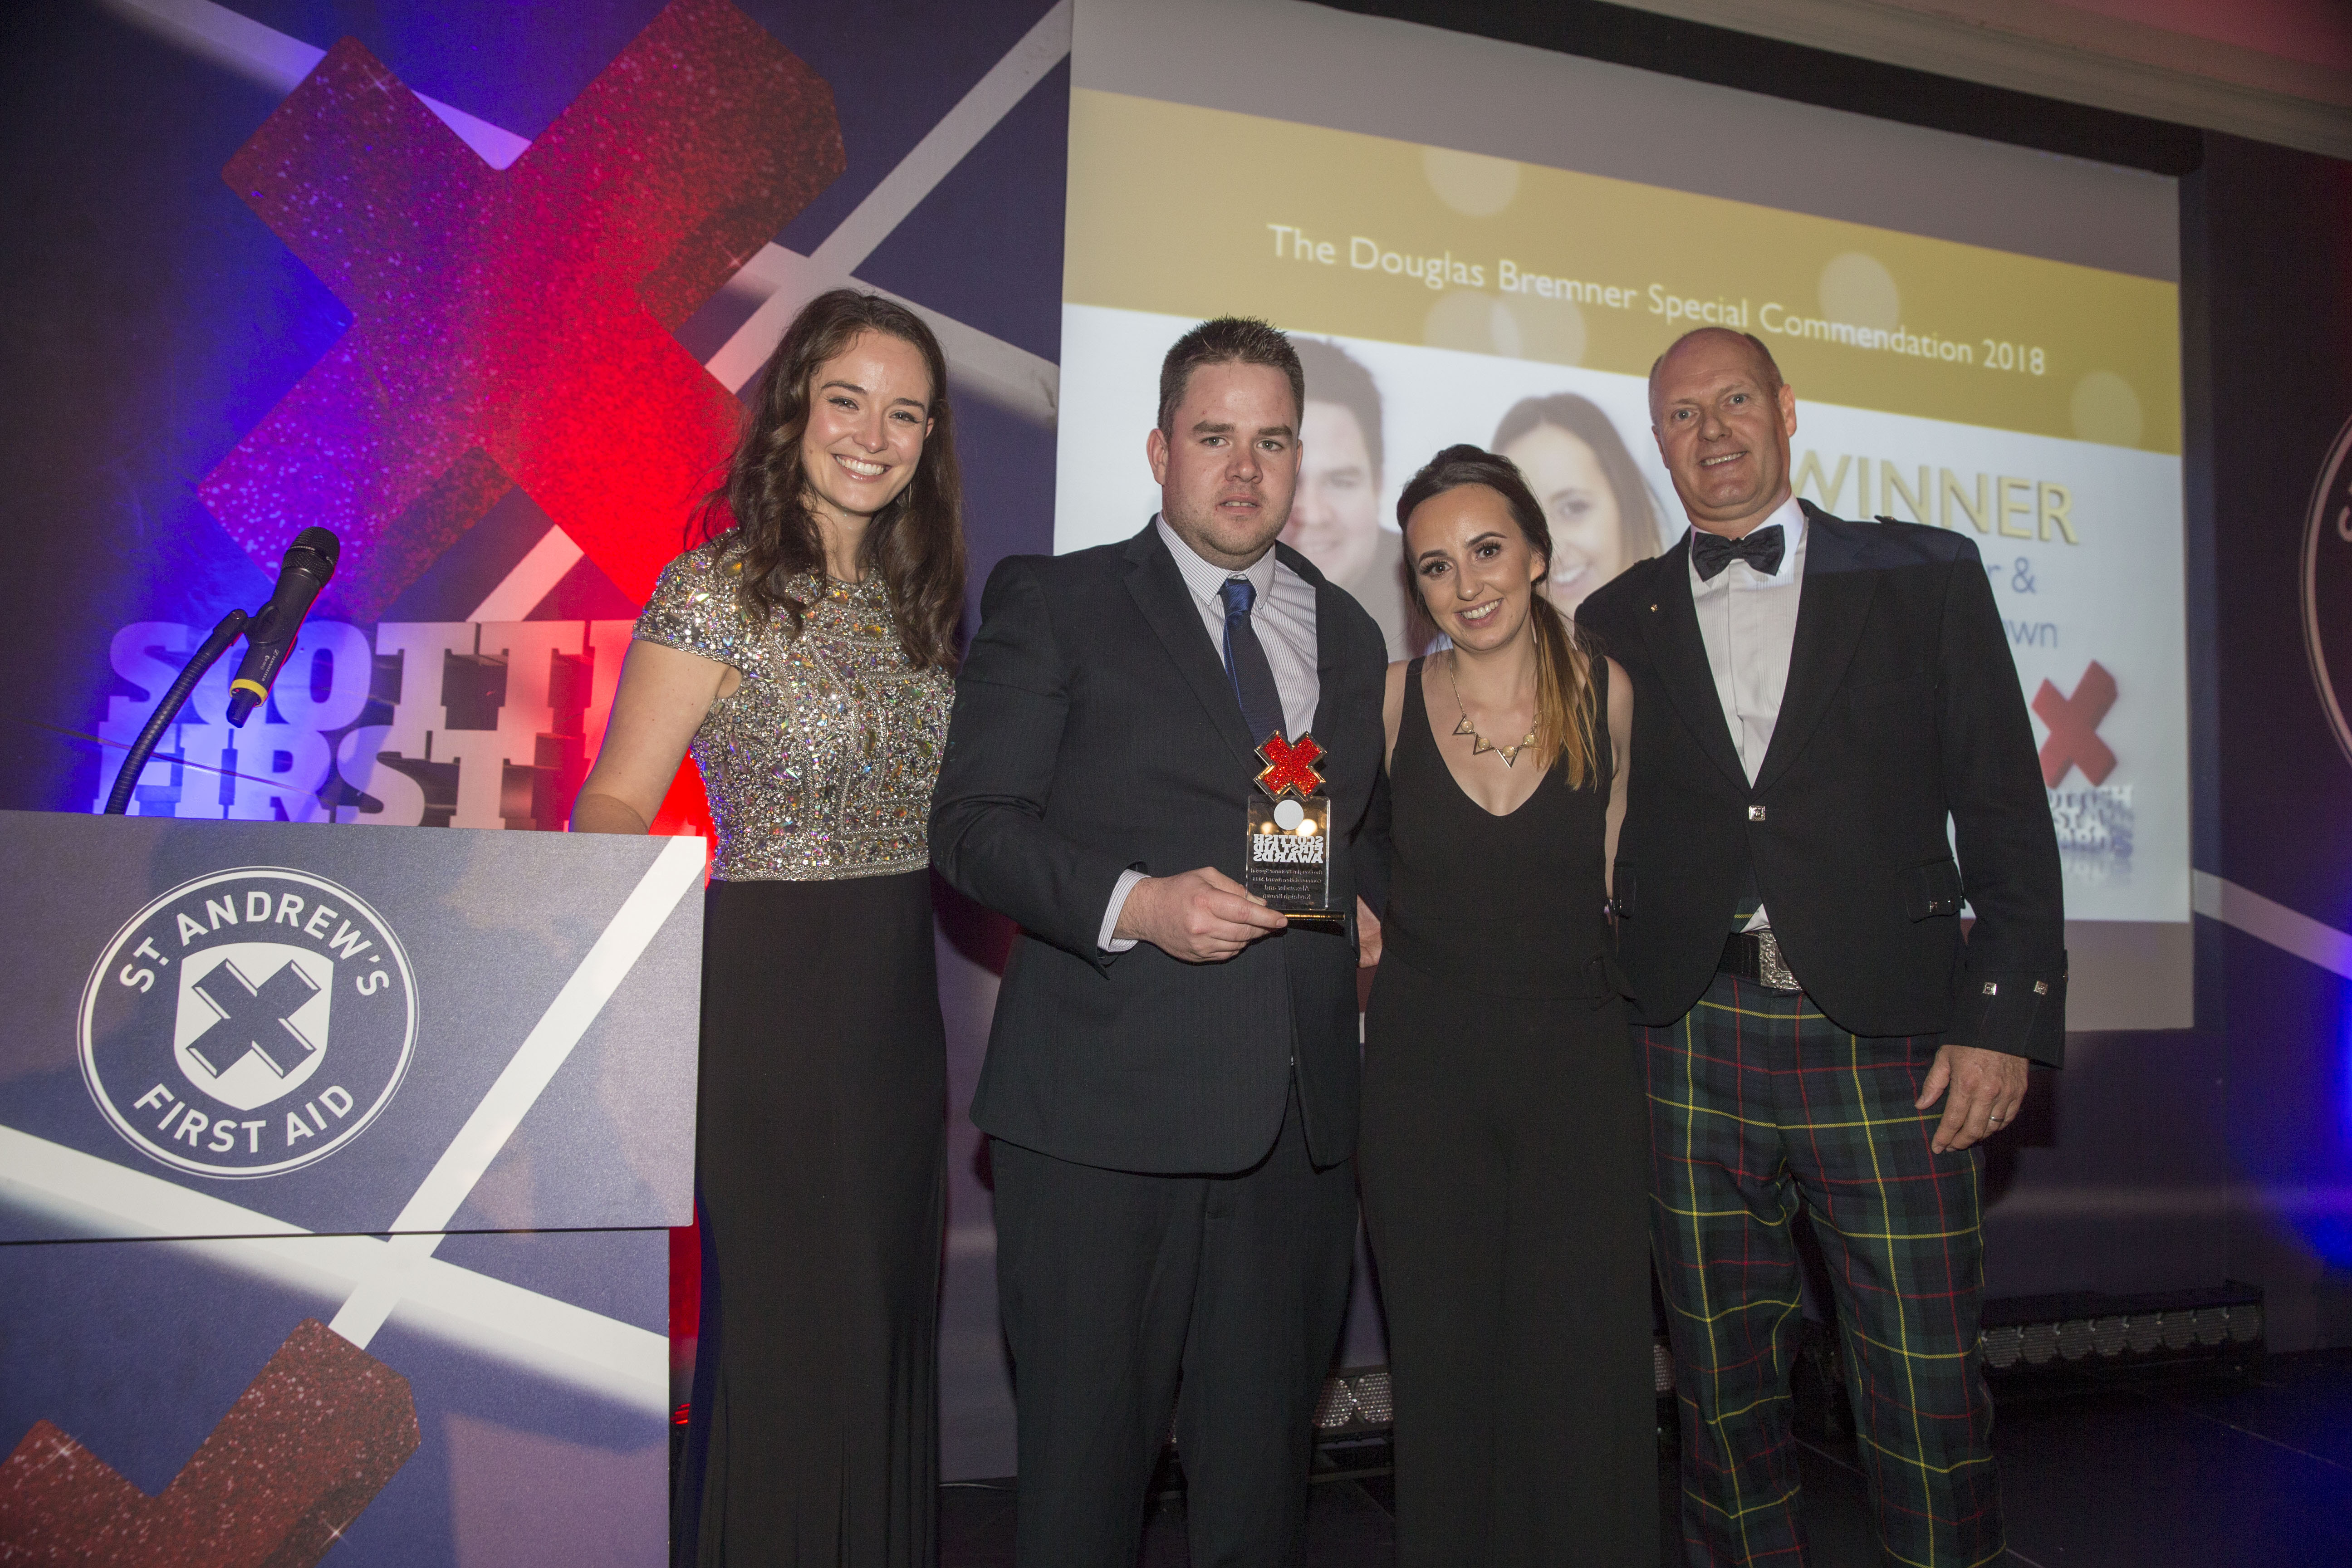 Alec and Kayleigh Brown with former STV presenter and ex-Miss Scotland Jennifer Reoch (left) and Stuart Callison, chief executive of St Andrew's First Aid